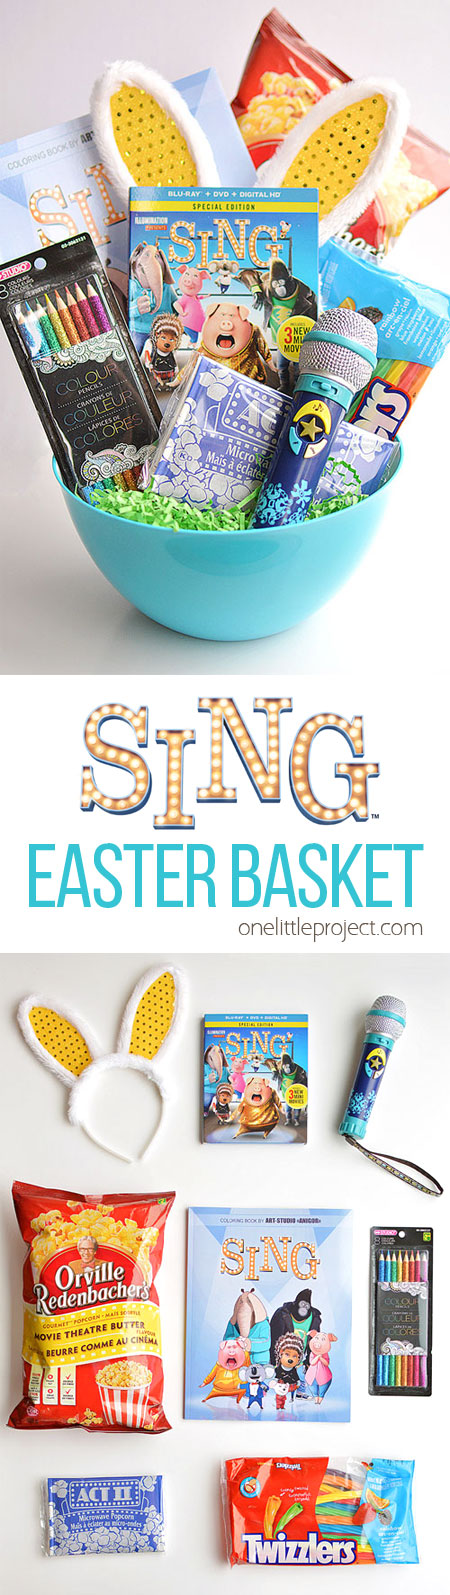 Make your own SING themed movie night Easter basket! With popcorn and all your favourite movie treats. The Blu-ray is in stores now! I love the bunny ears behind it. So cute! #sponsored